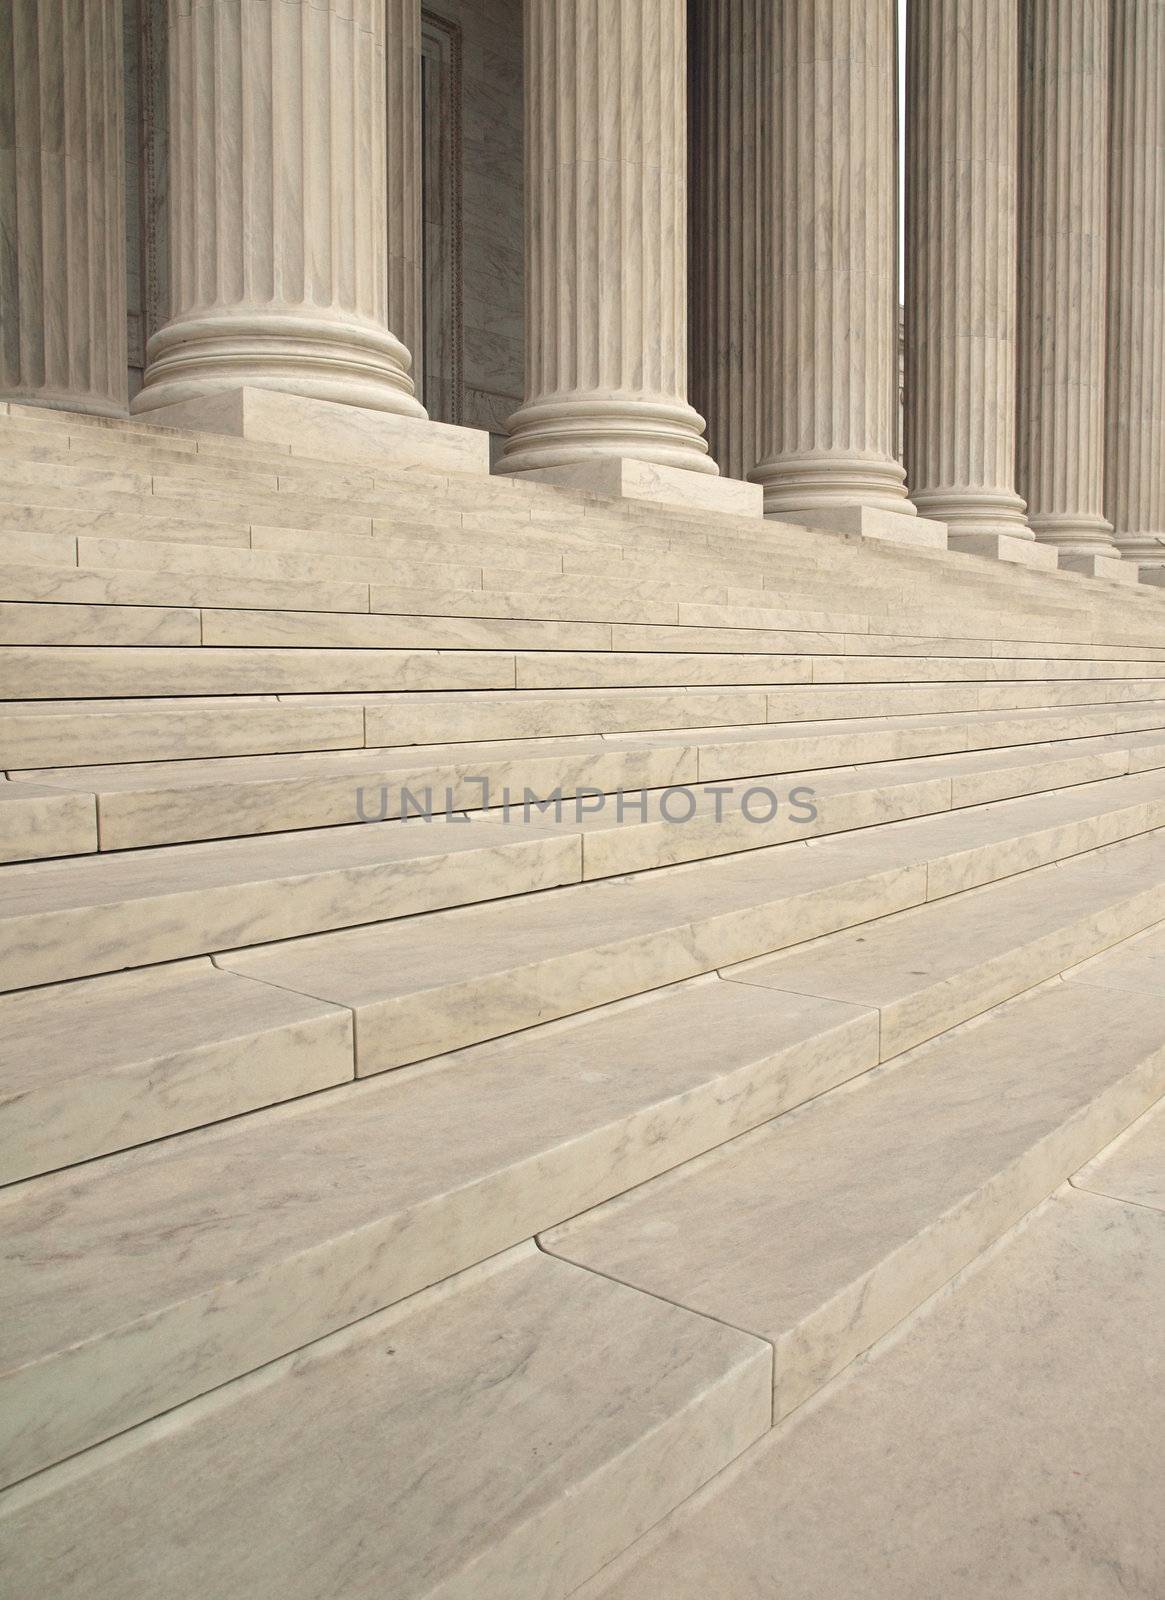 Steps and Columns at the Entrance of the United States Supreme Court in Washington DC